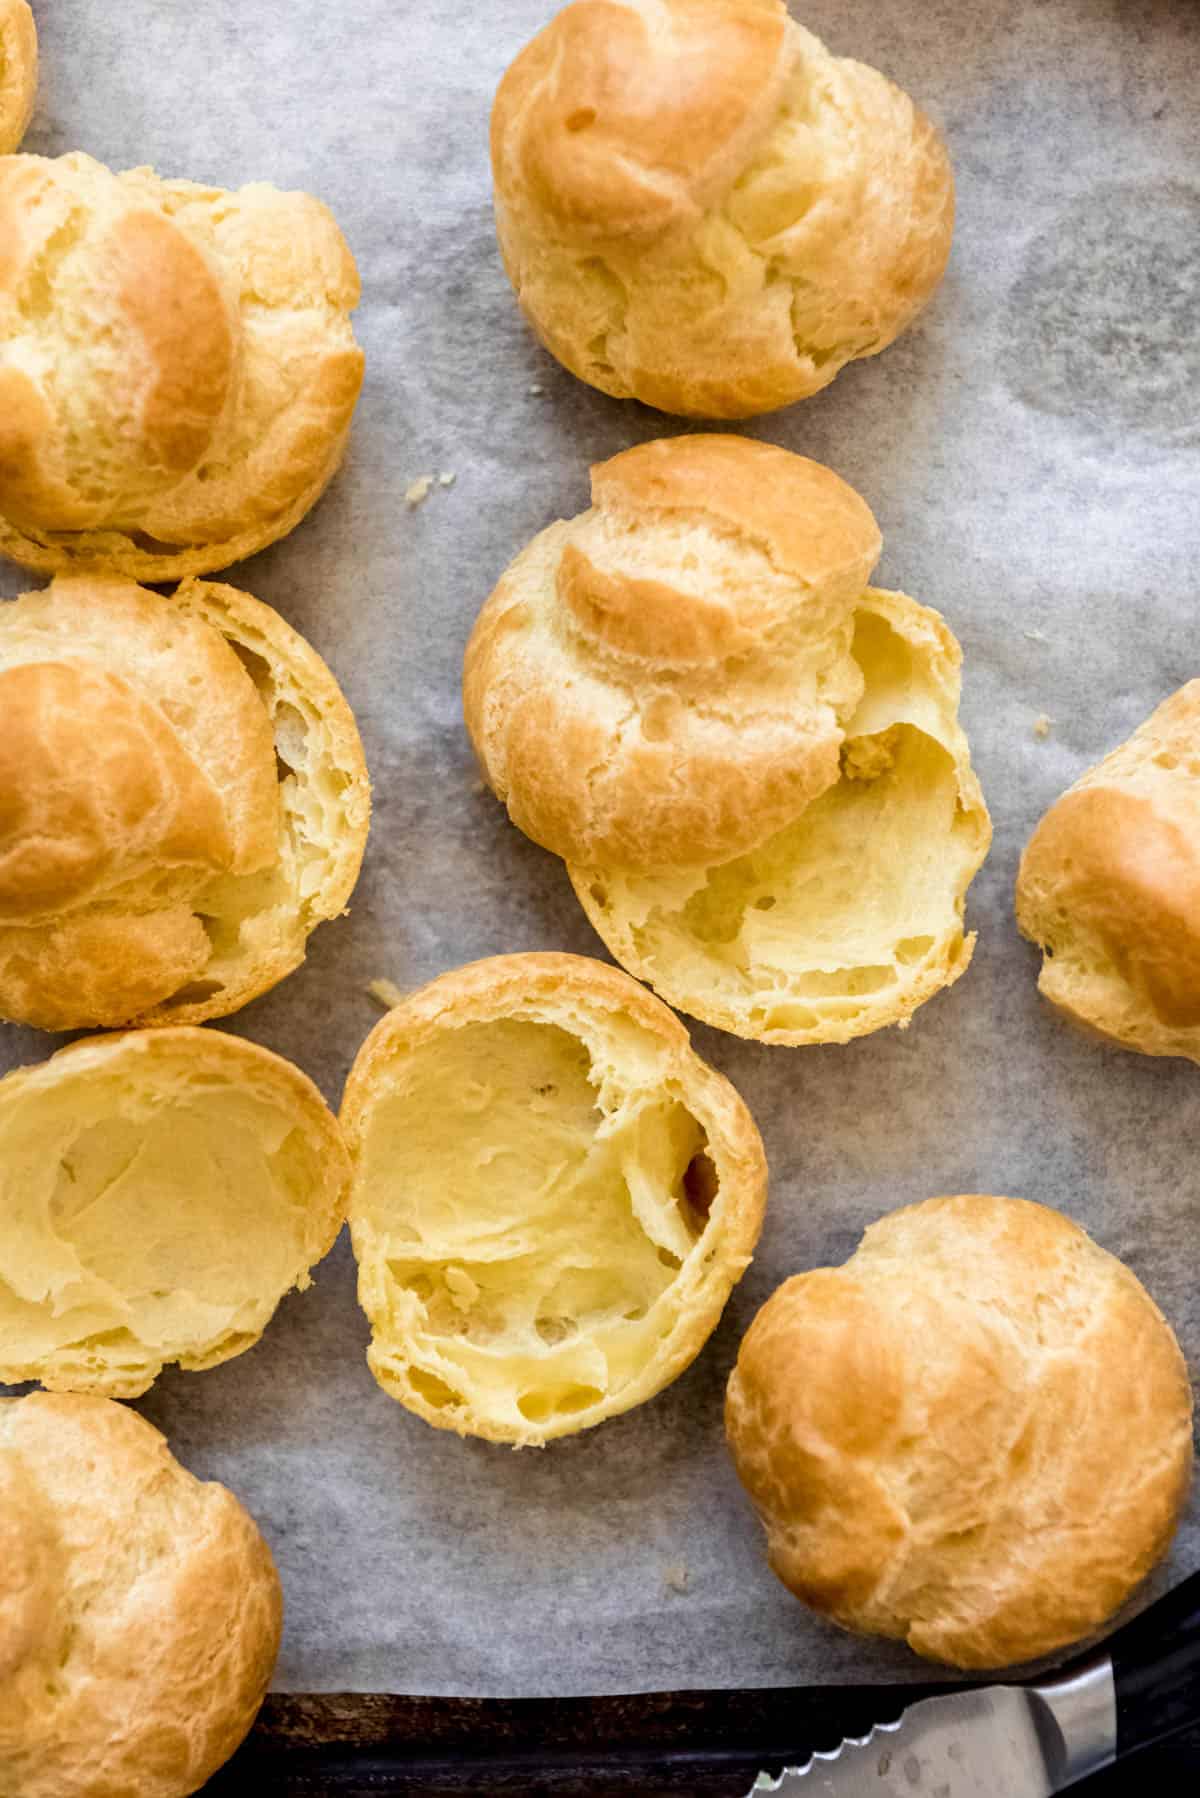 Homemade cream puffs that have been sliced open.